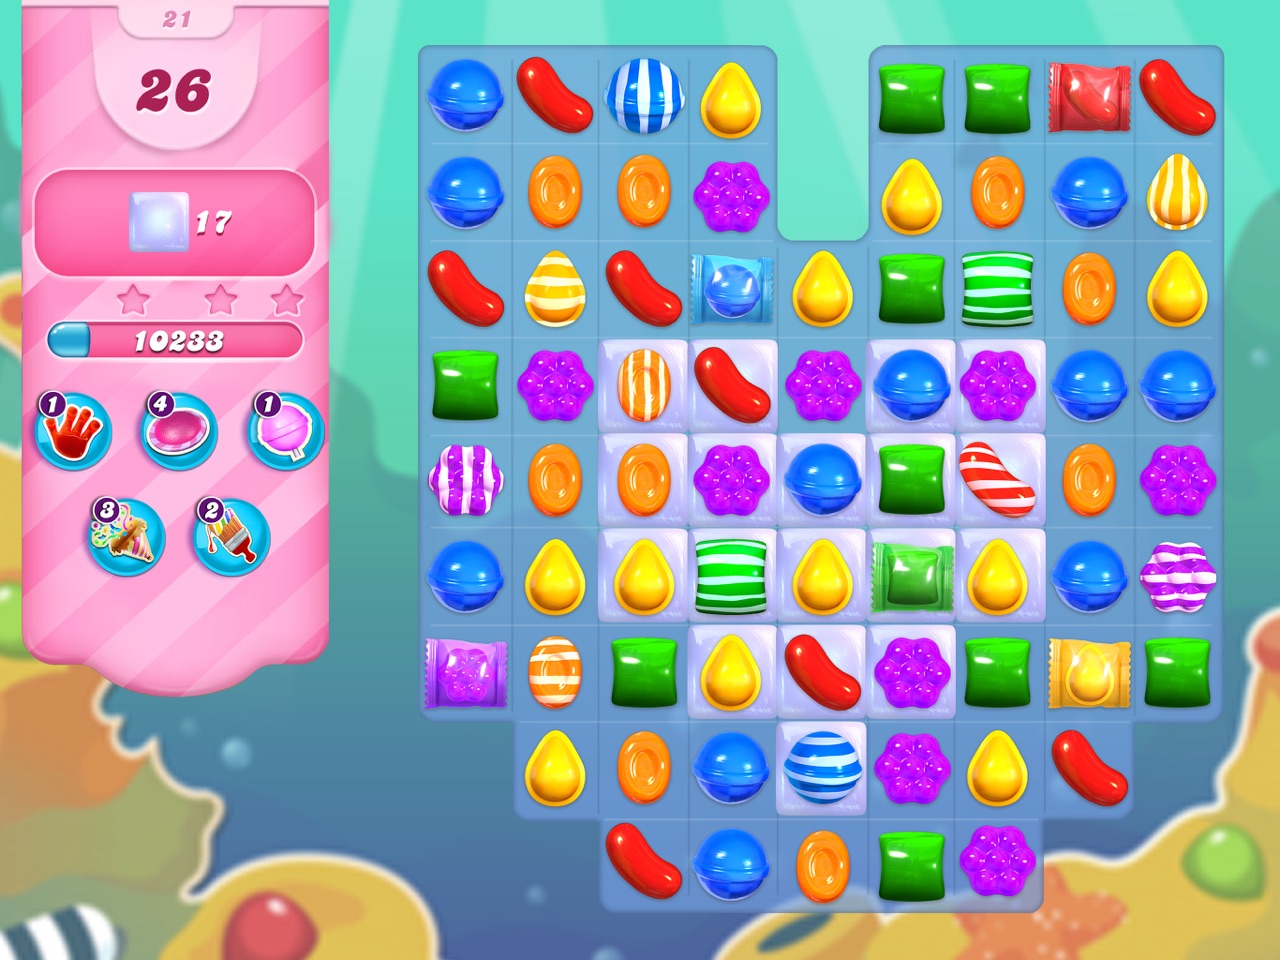 How many levels are in Candy Crush Saga? Dot Esports